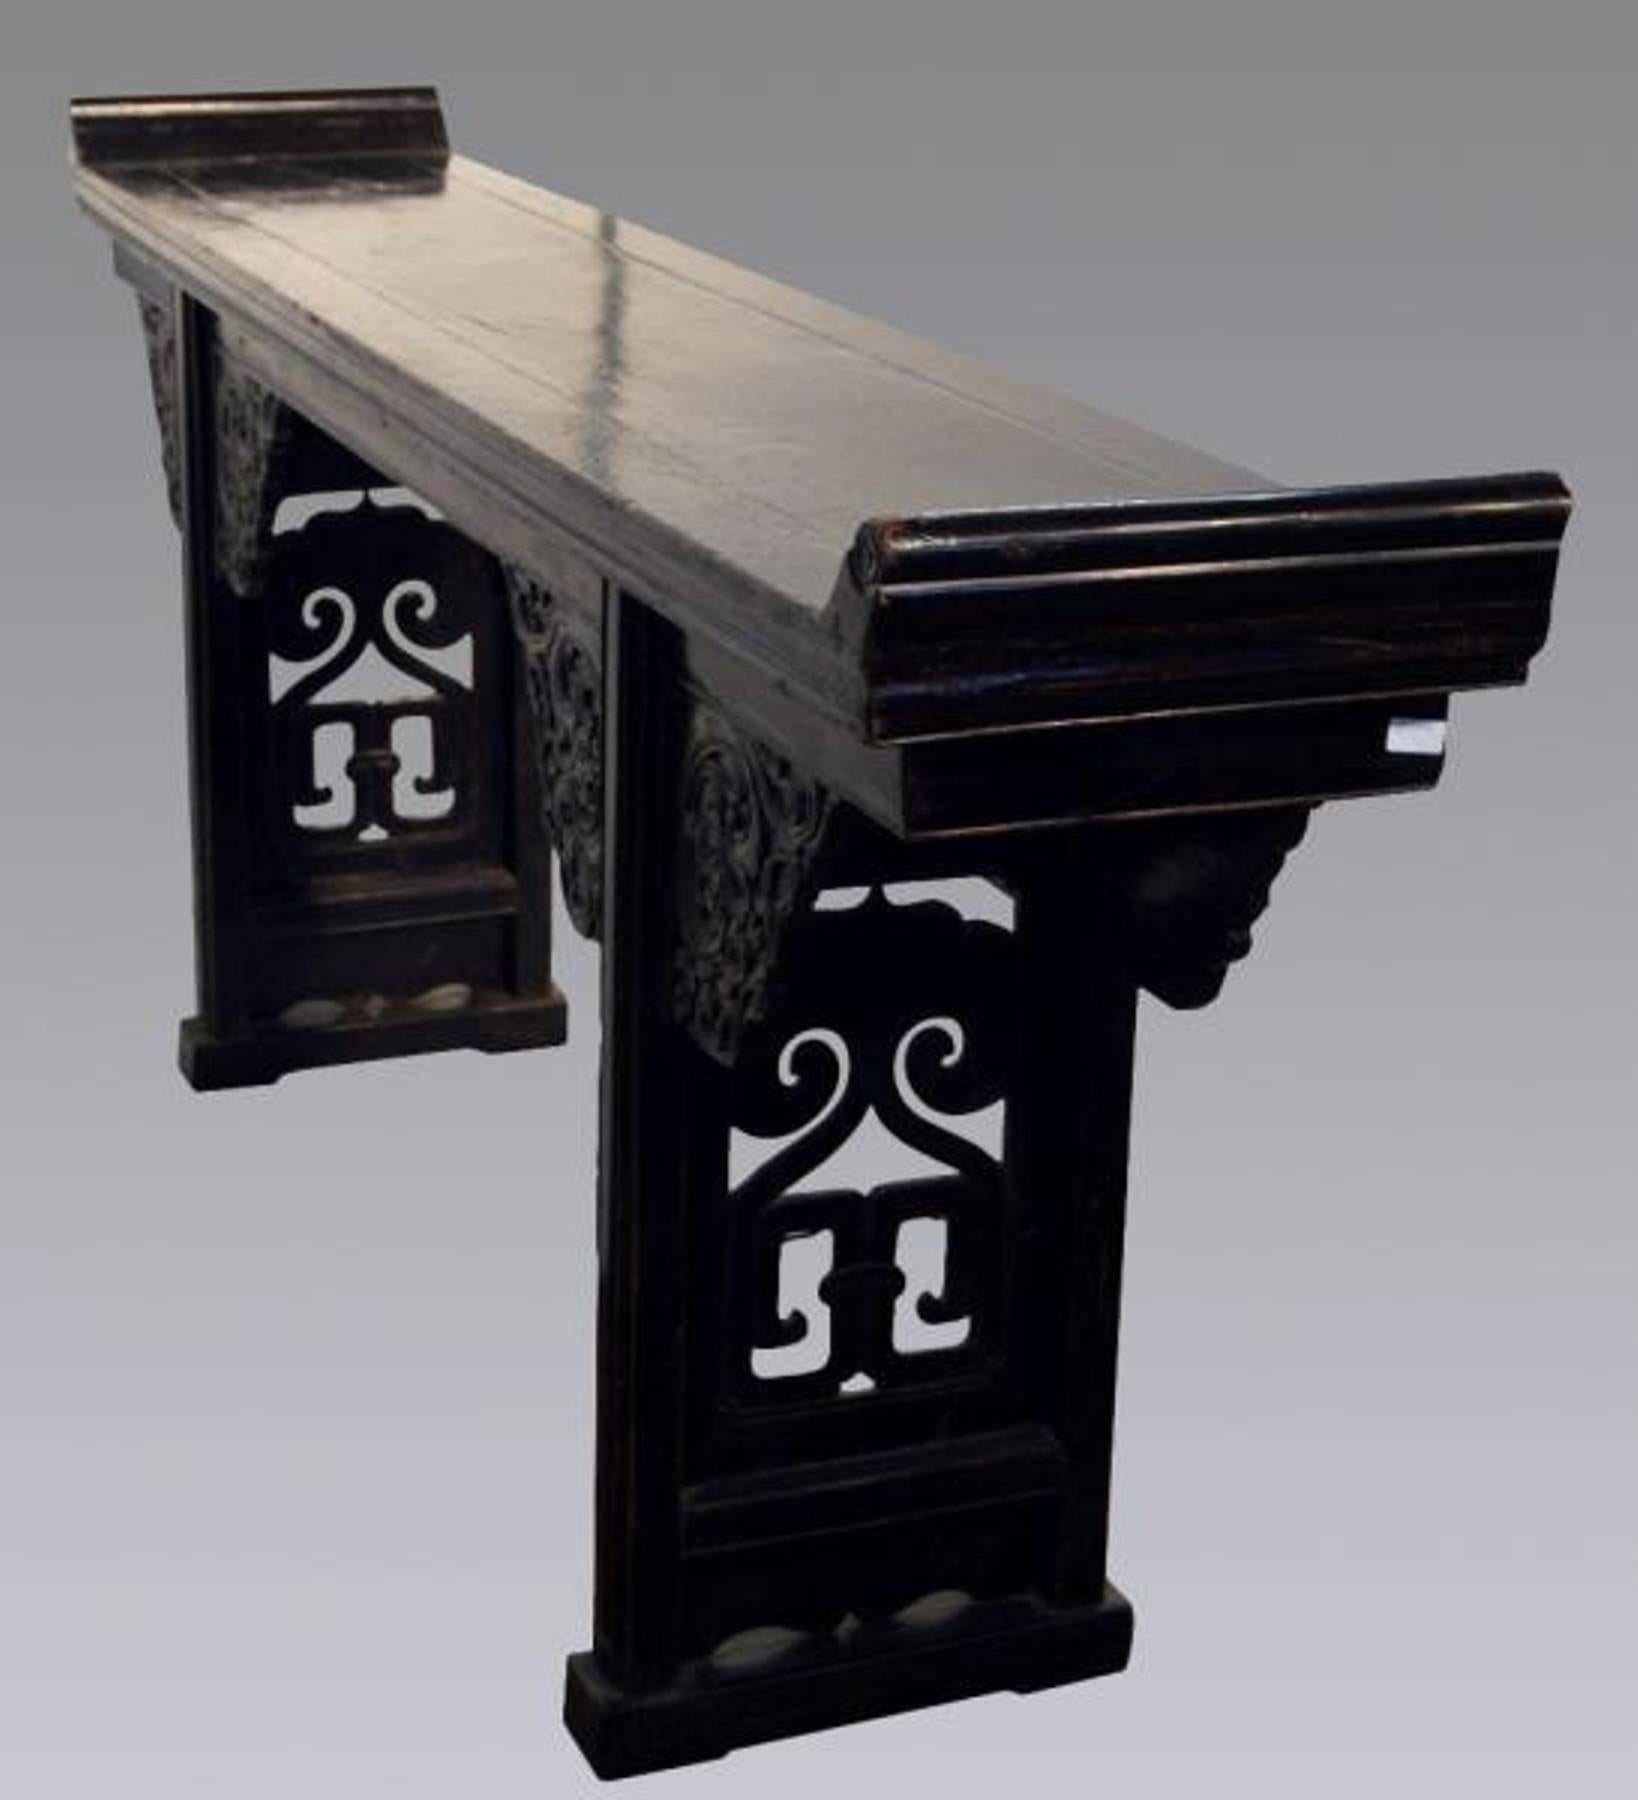 19th Century Antique Black Lacquer Console Table with Carved Details from China, circa 1800s